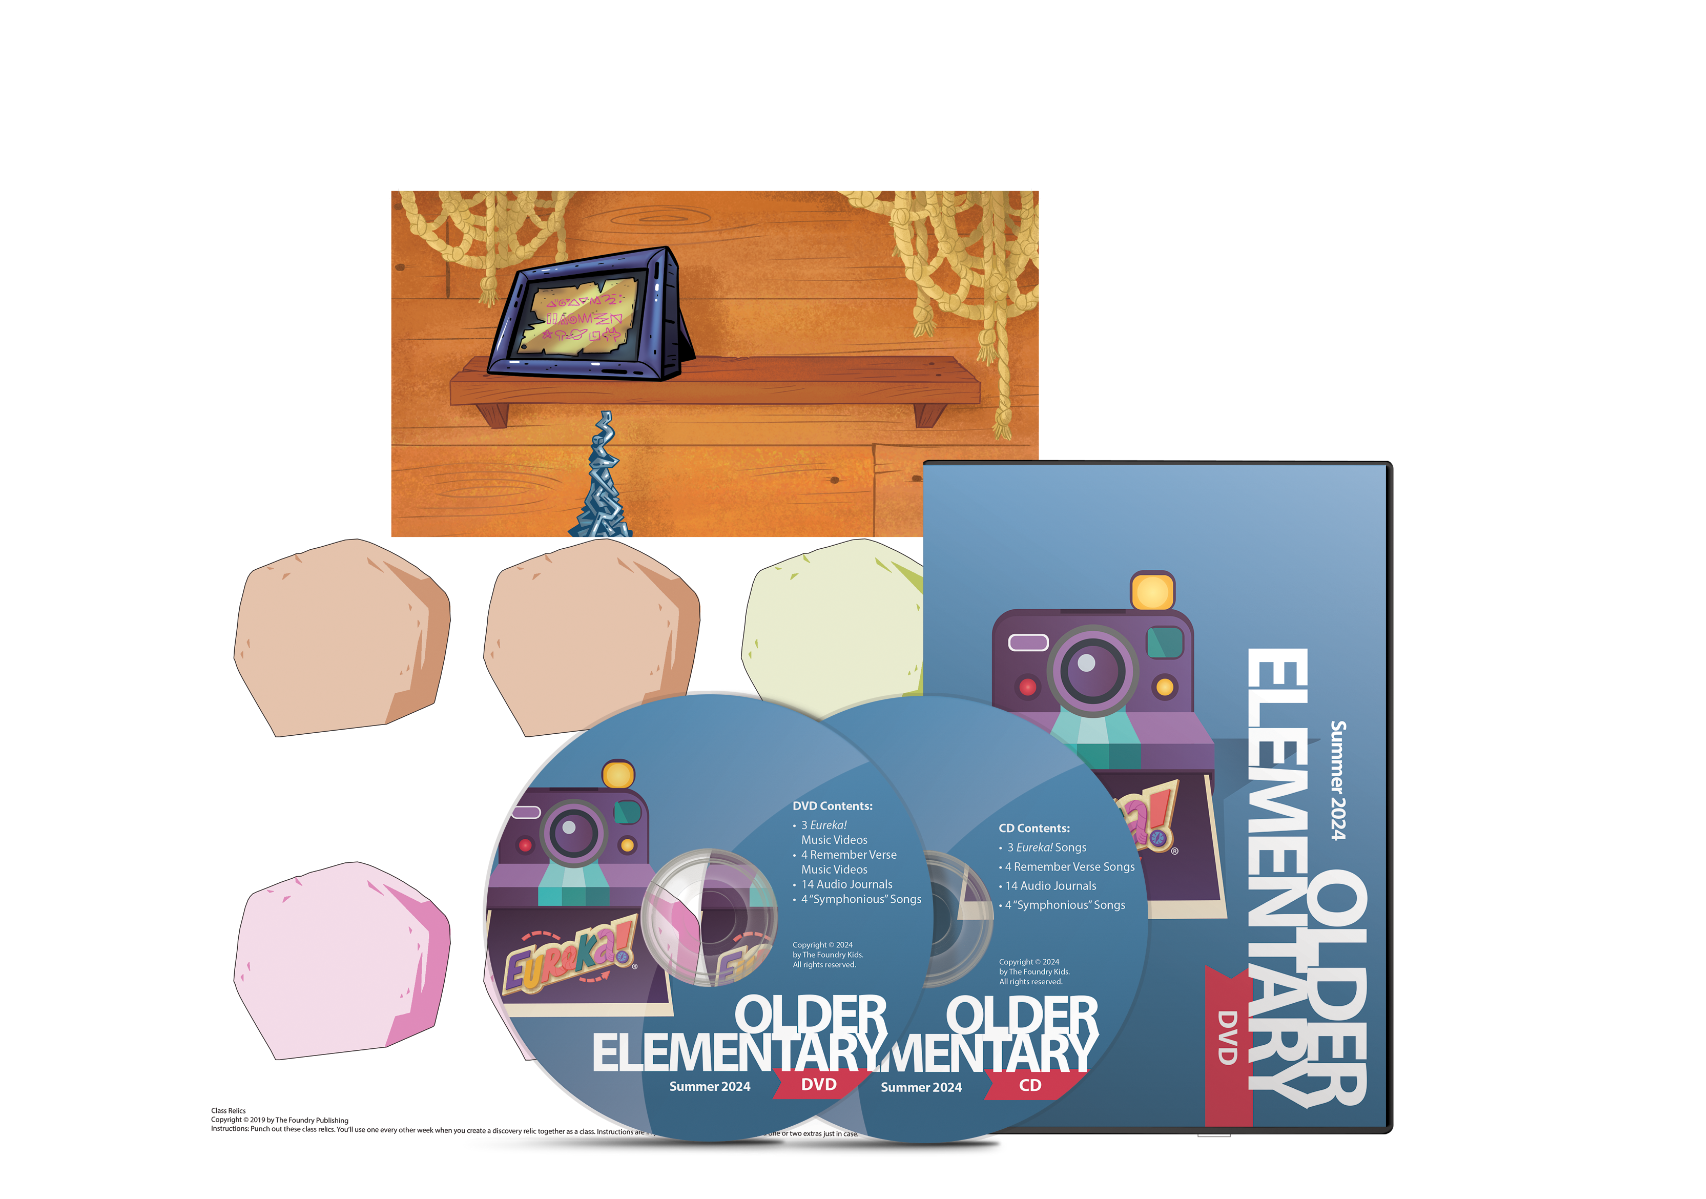 Older Elementary Expedition Resources